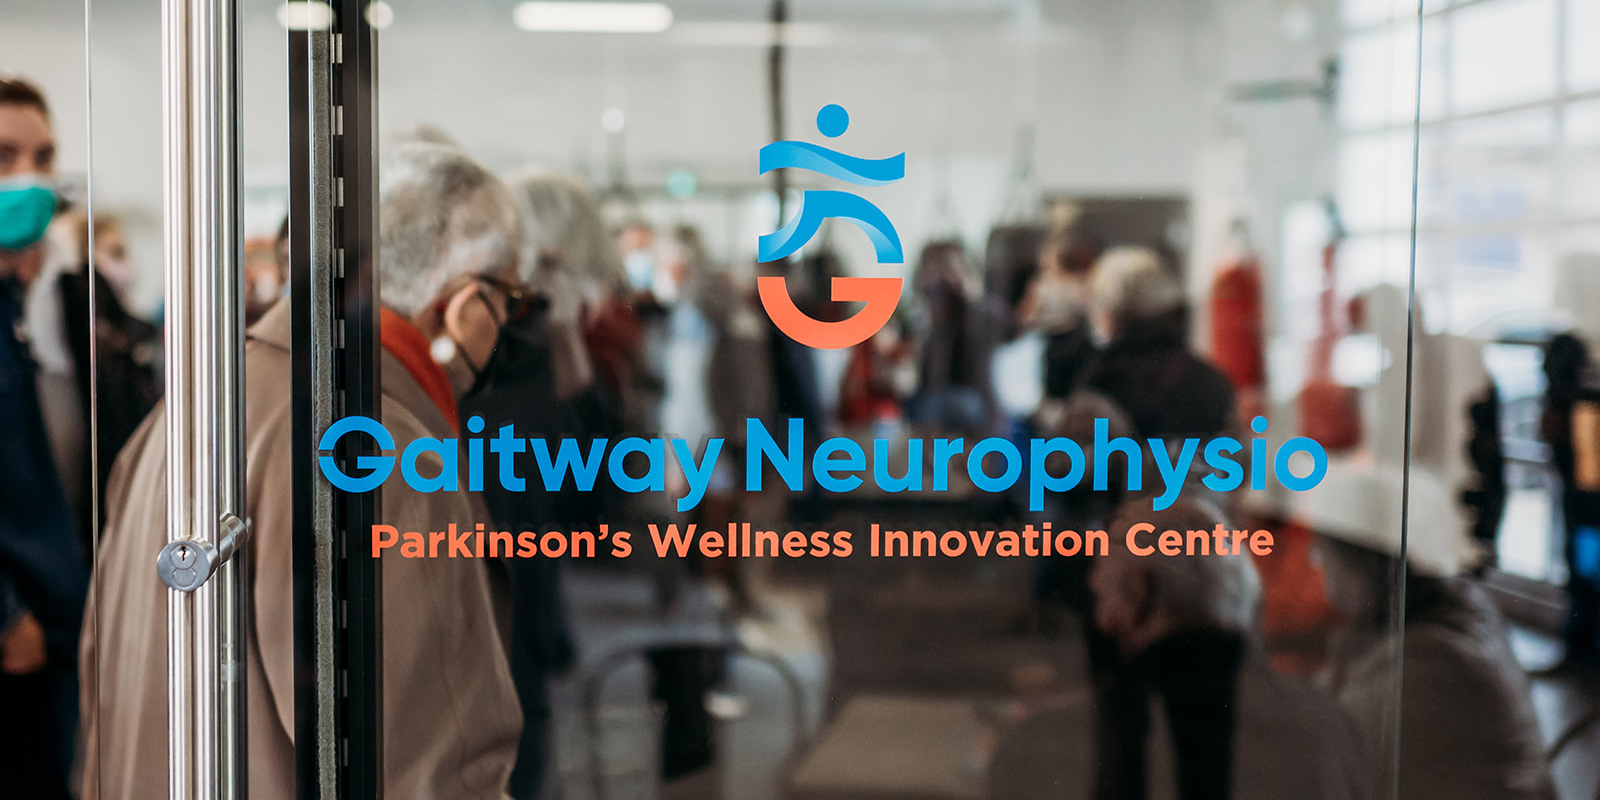 Gaitway Neurophysio provides neurological physiotherapy services to clients within the Greater Hamilton Area.